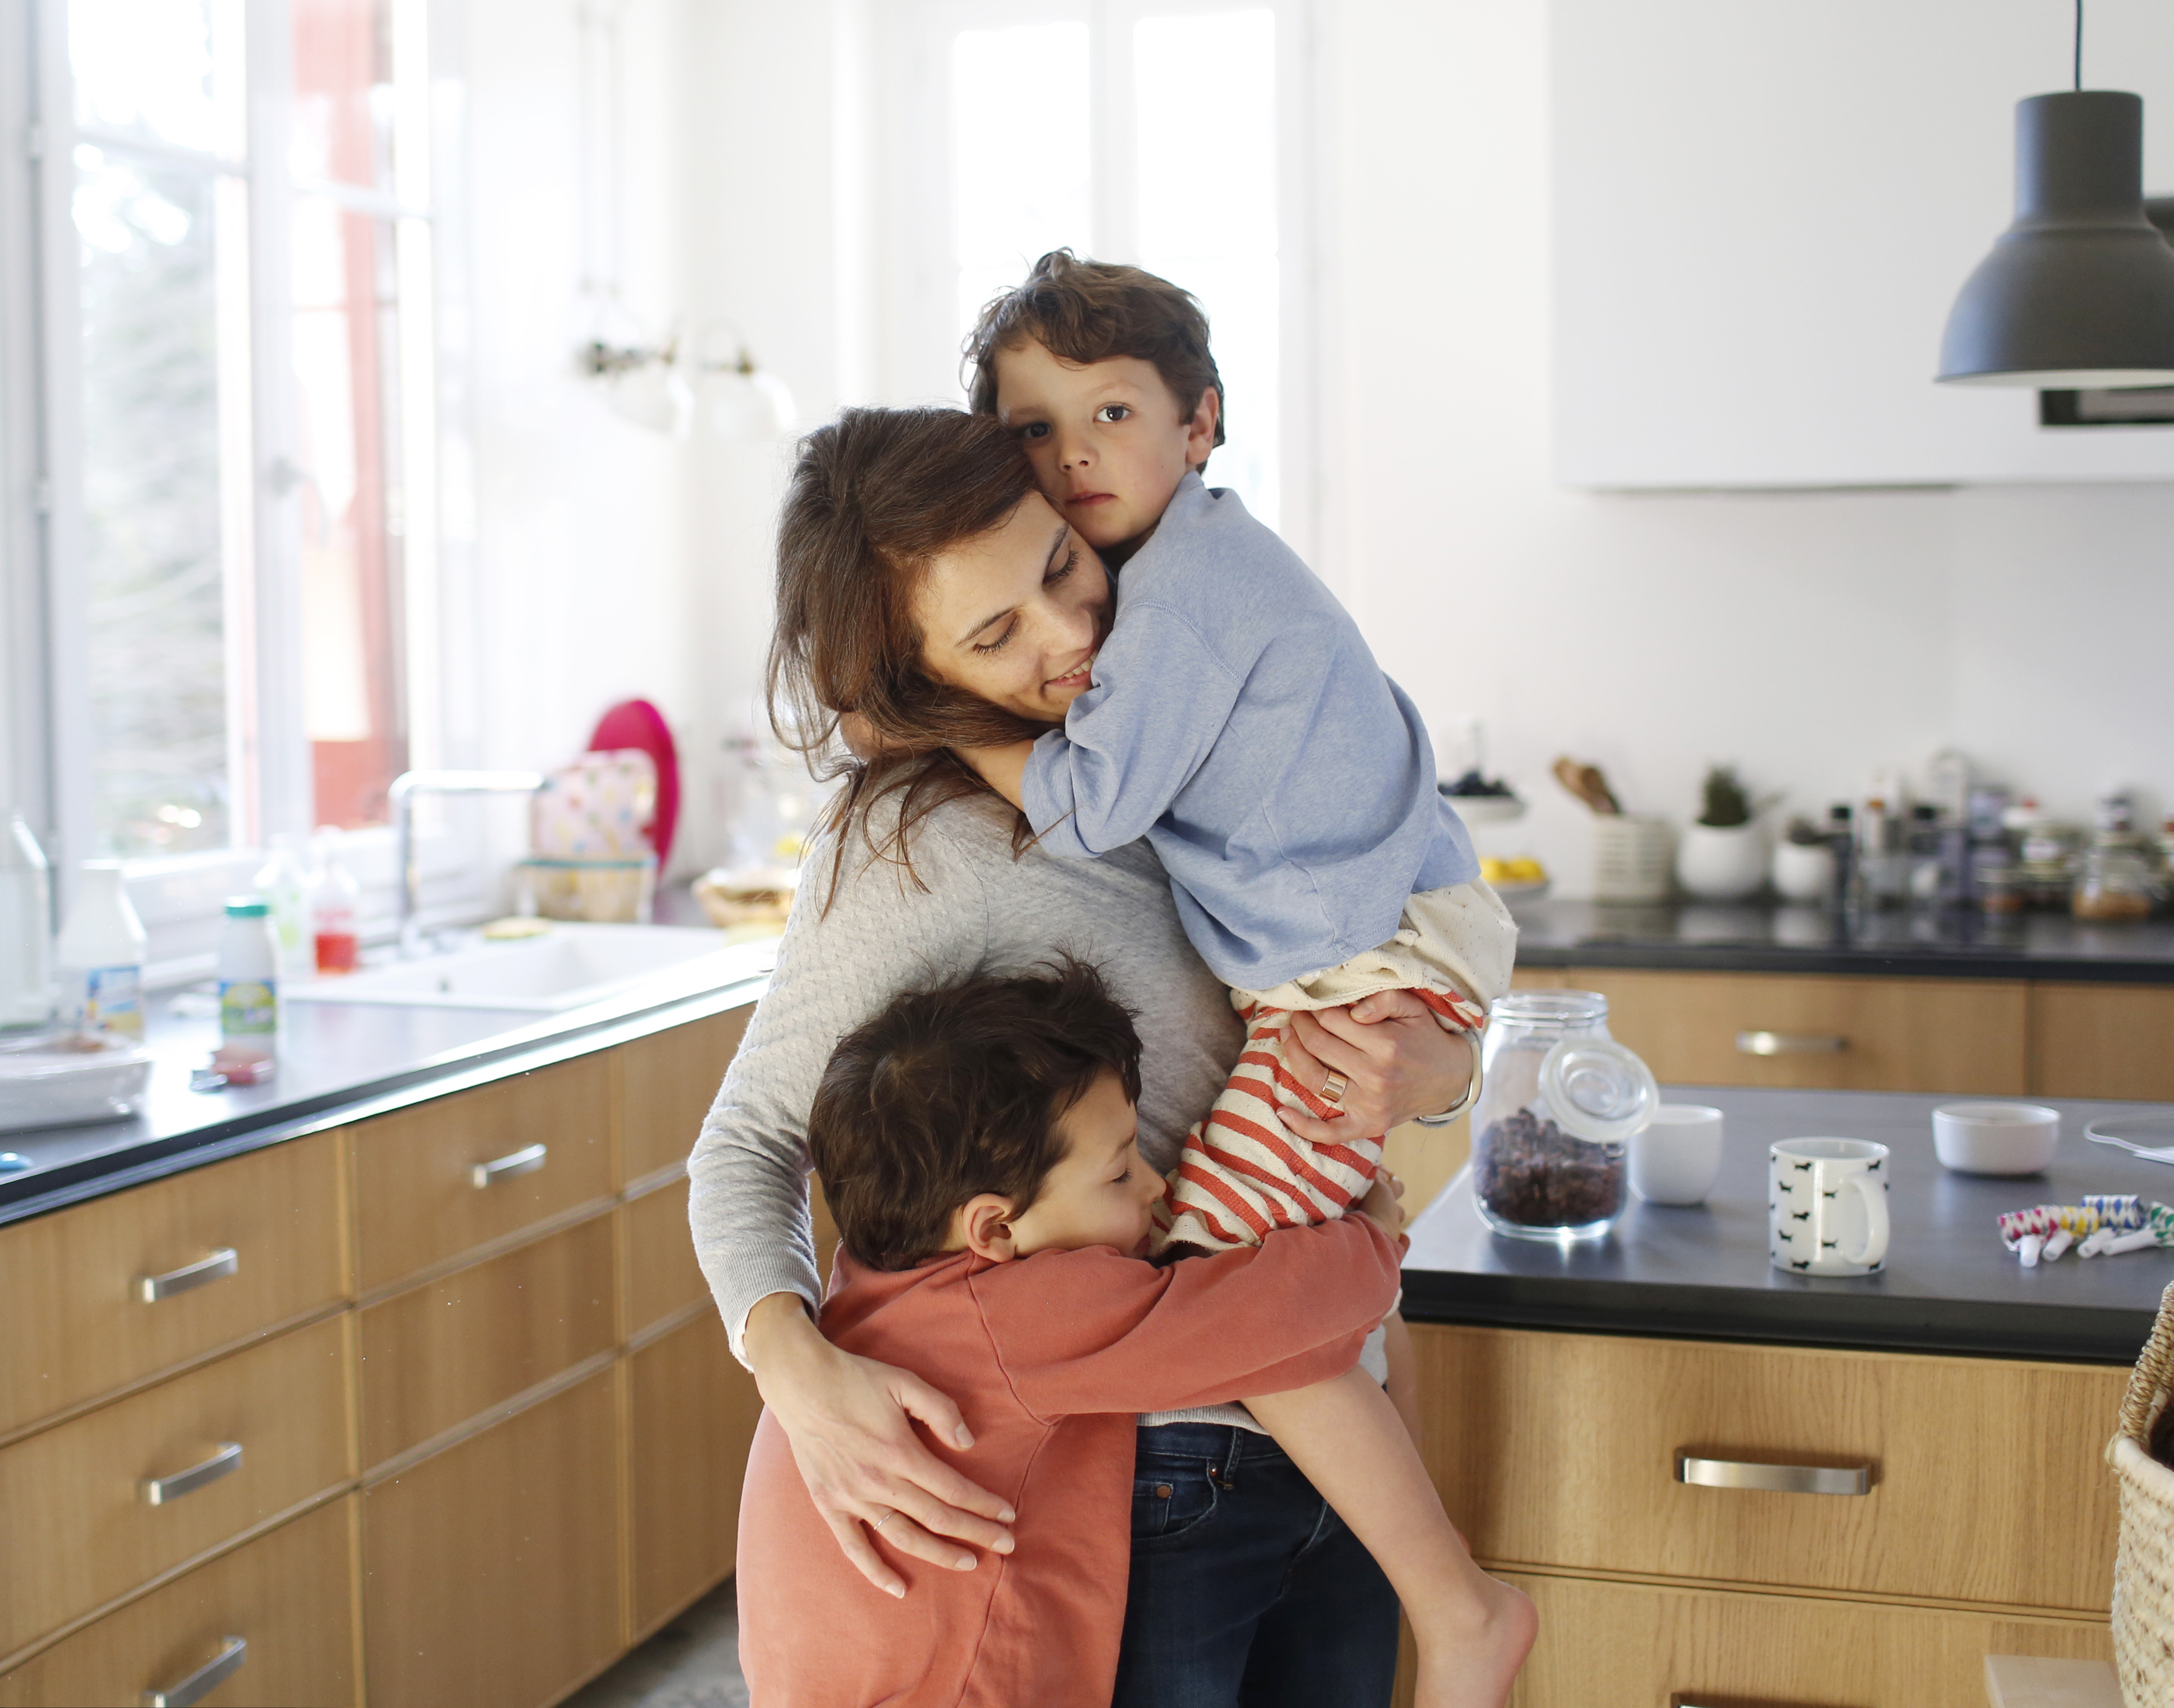 A mom and her two boys | Source: Getty Images